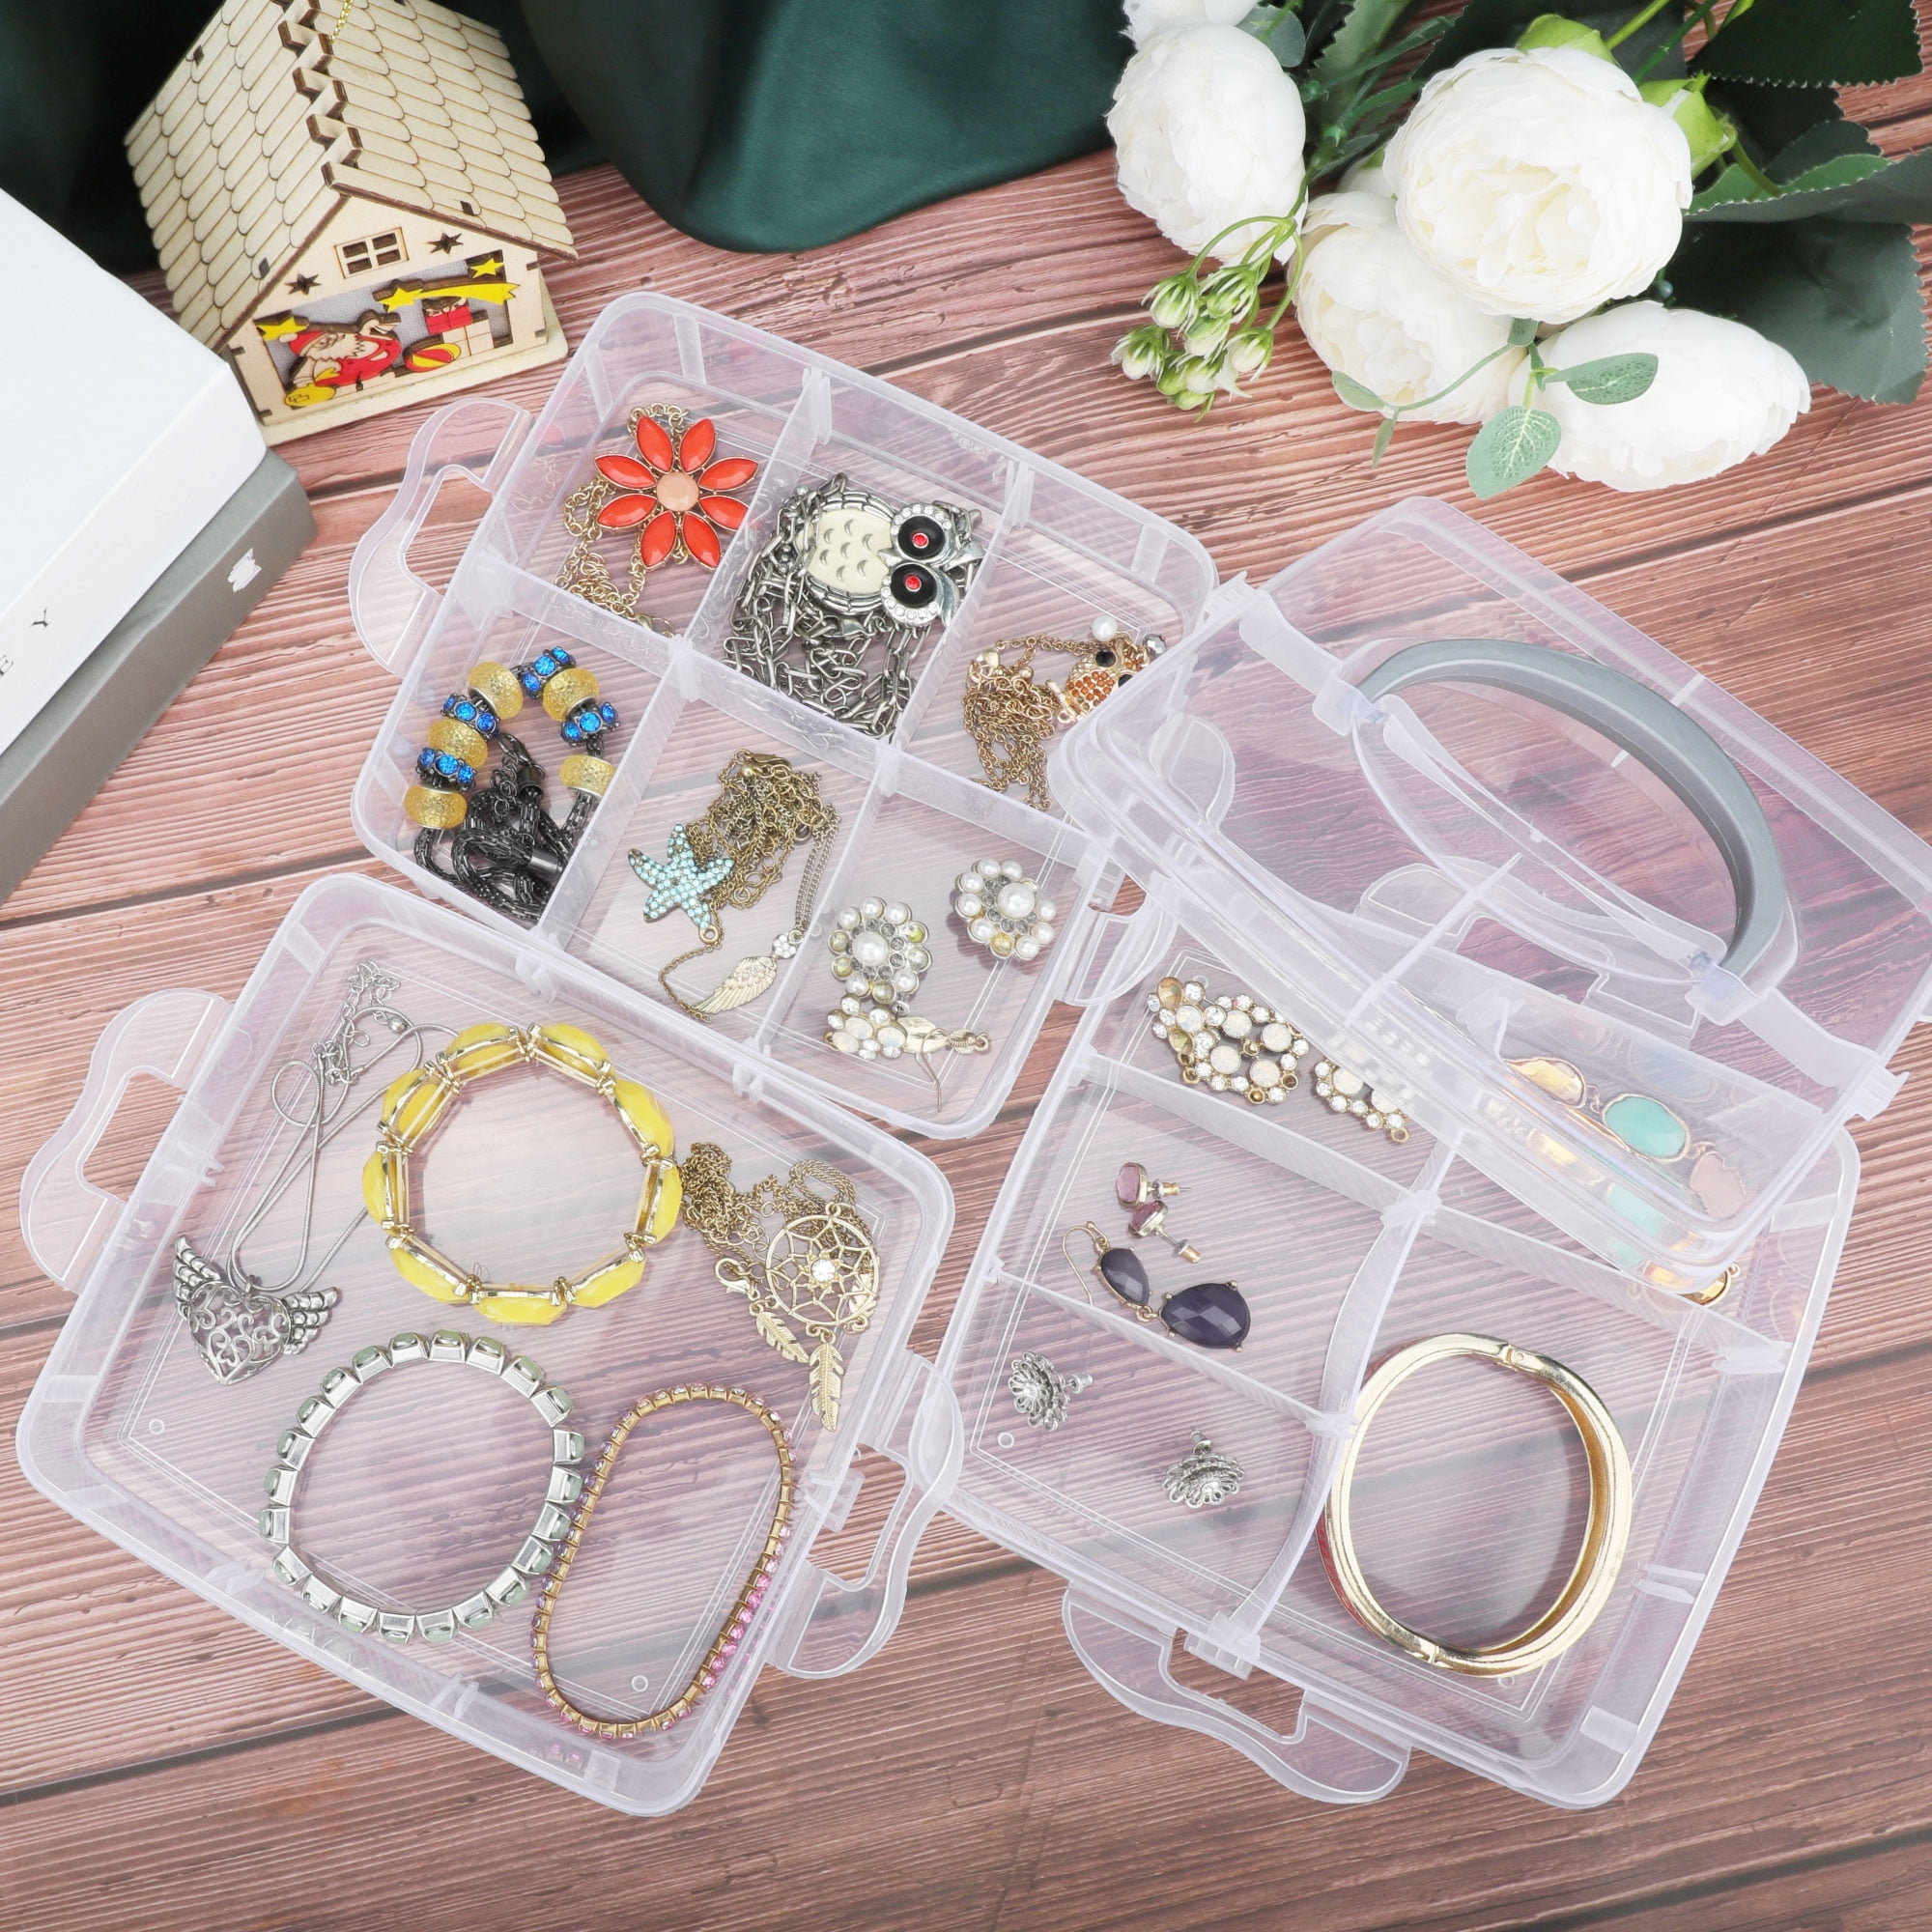 Plastic Organizer Box Storage Container Jewelry Box with Adjustable Dividers  for Beads Art DIY Crafts Jewelry Fishing Tackles Color: 5.71x3.23x1.38in